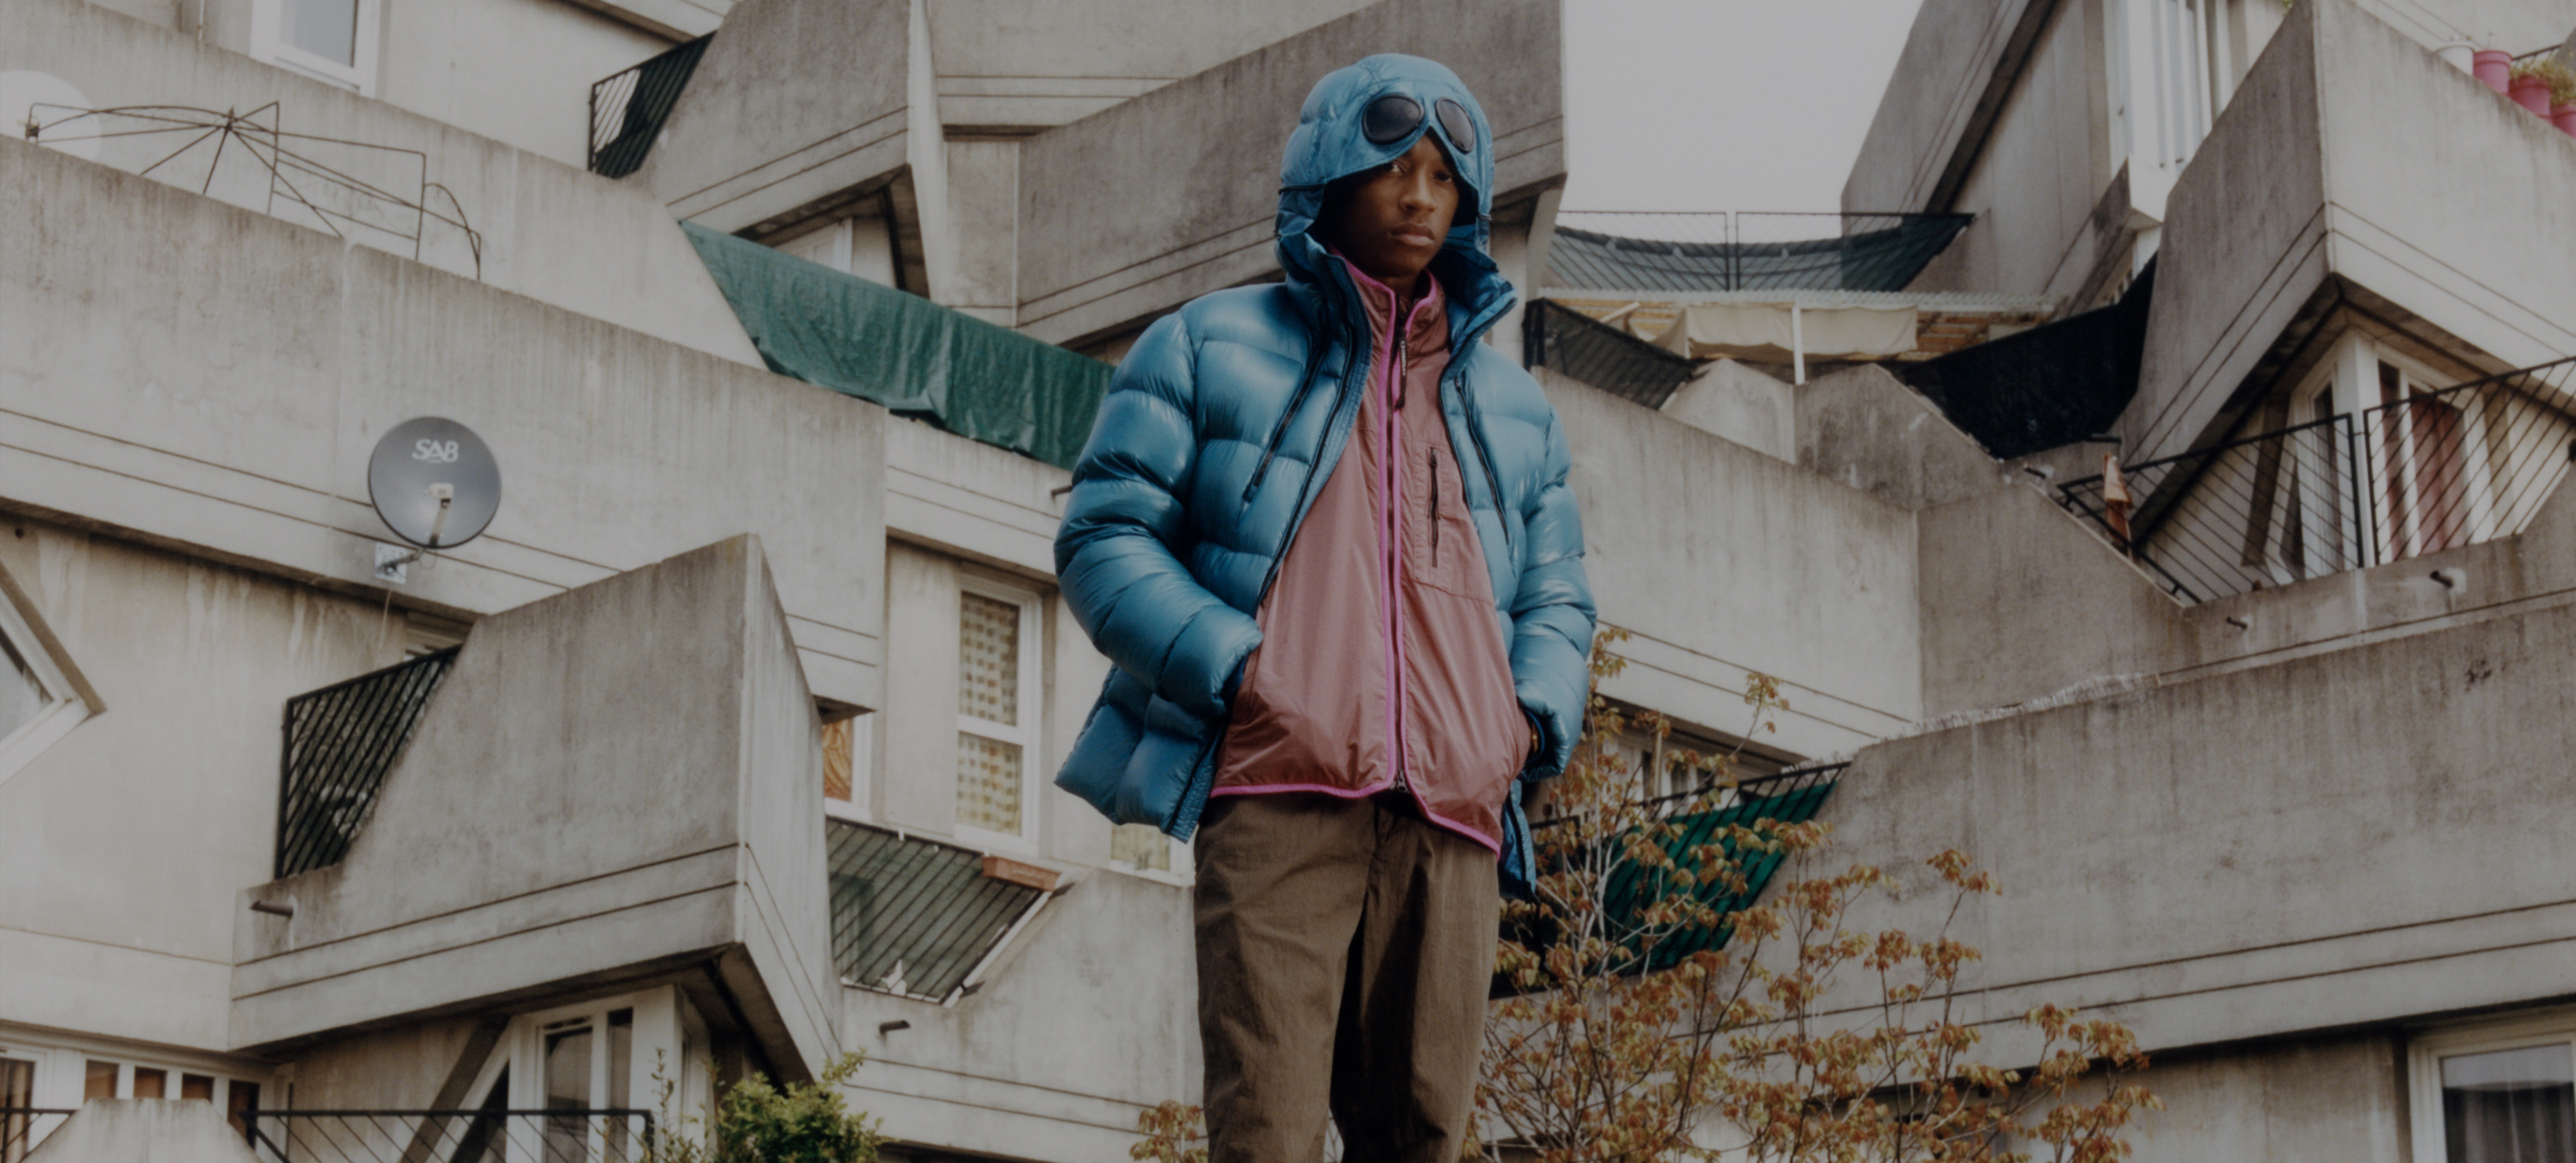 C.P. Company ‘Paris Mon Amour’, Eyes on The City featuring Rejjie Snow